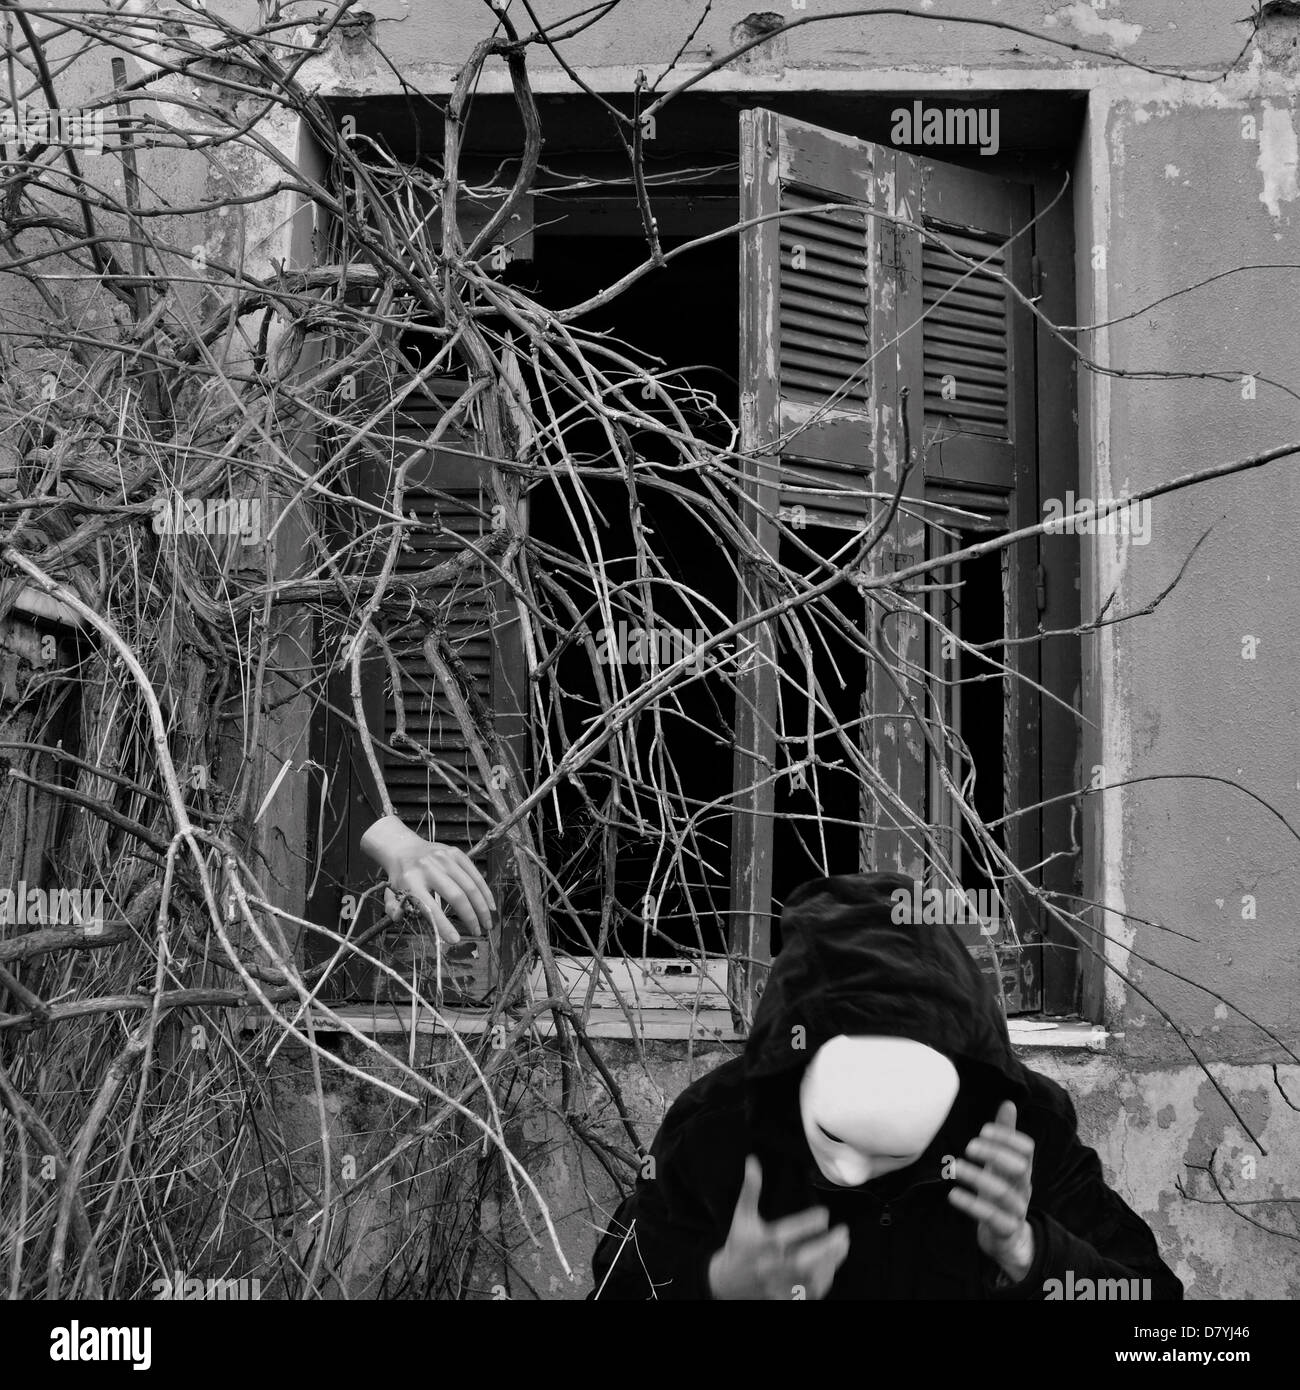 Masked figure in black and overgrown dead plants. Black and white, motion blur. Stock Photo